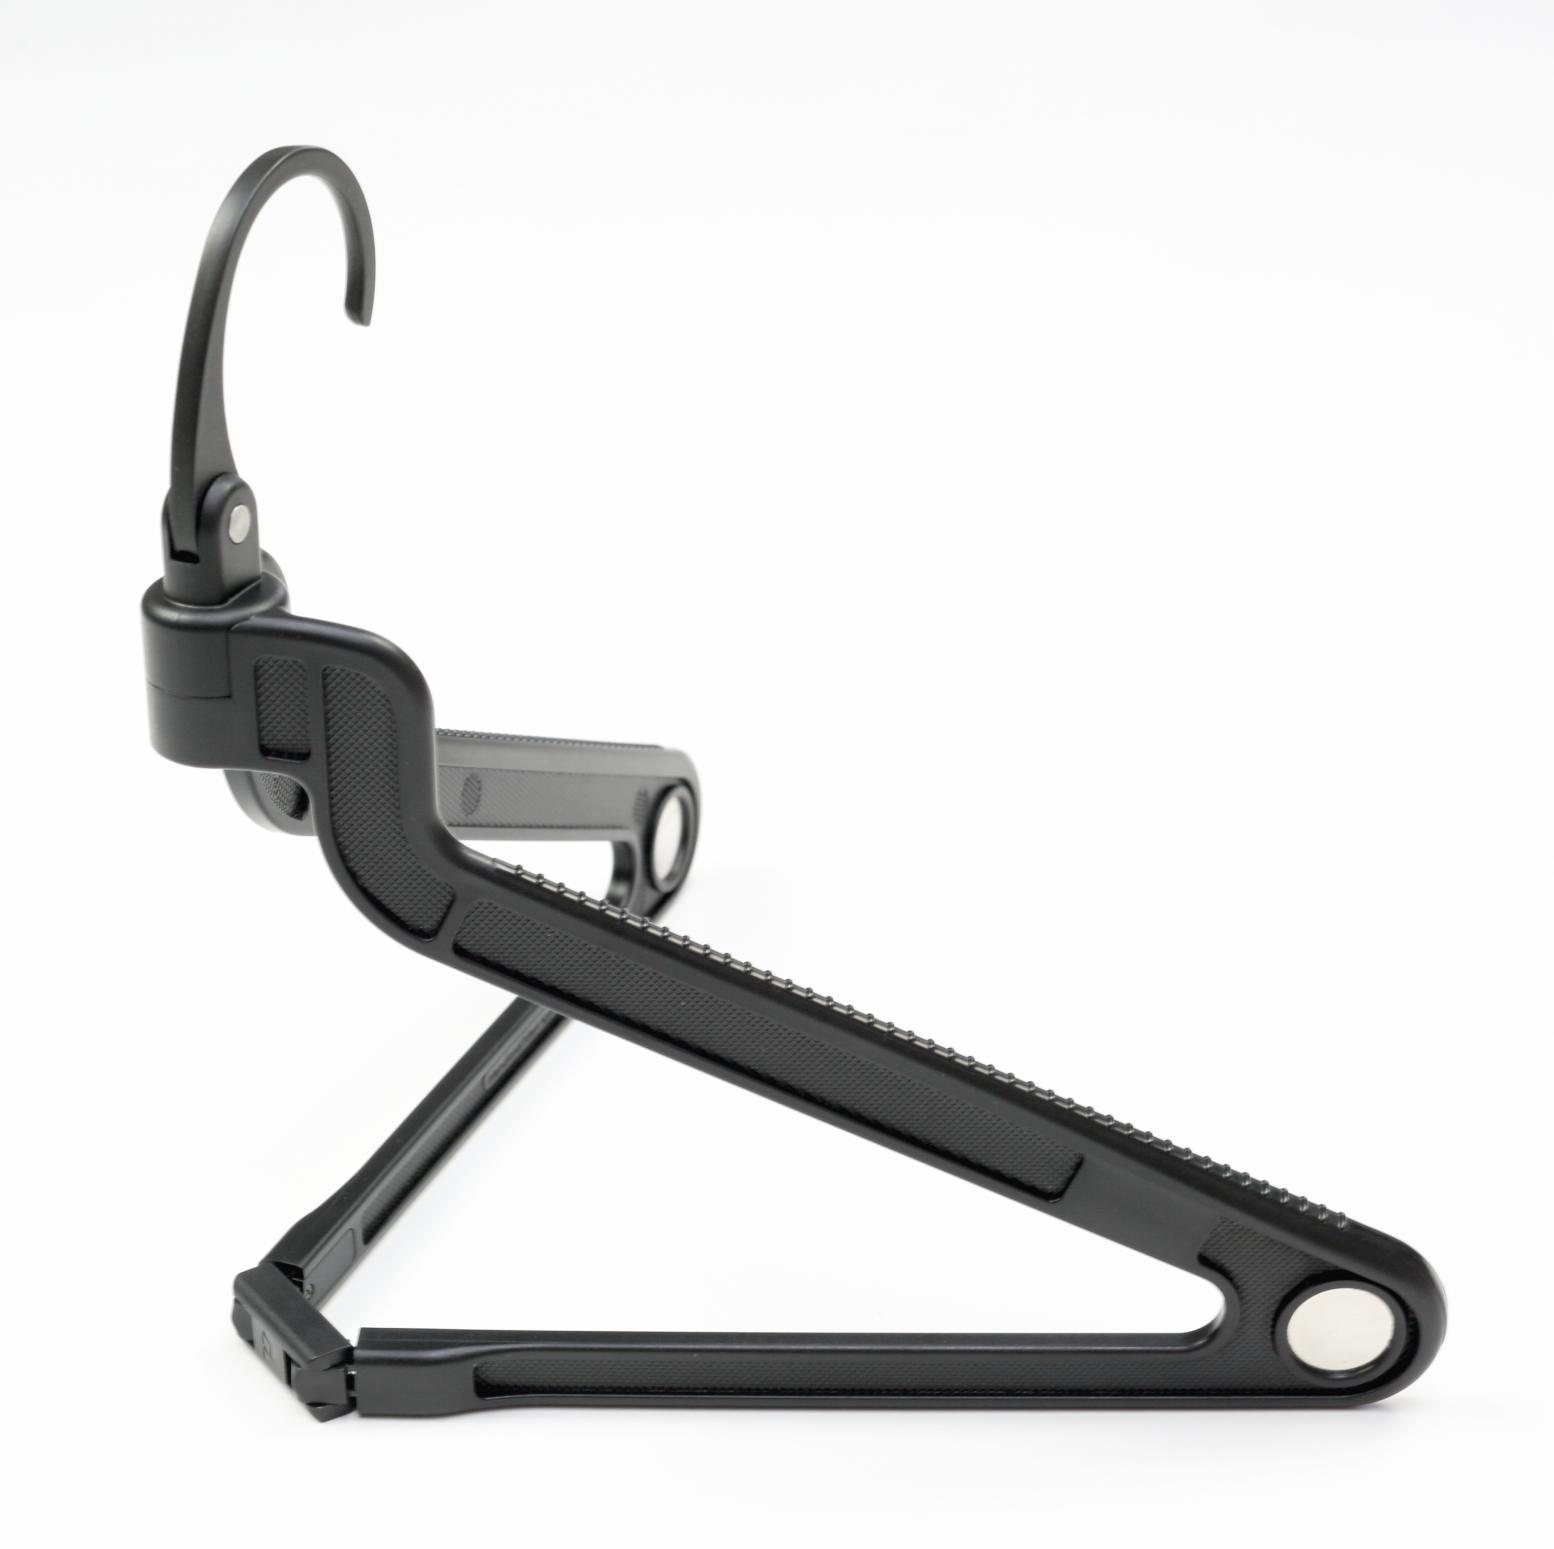 The PLIQO folding Hanger viewed from the side over a white background.